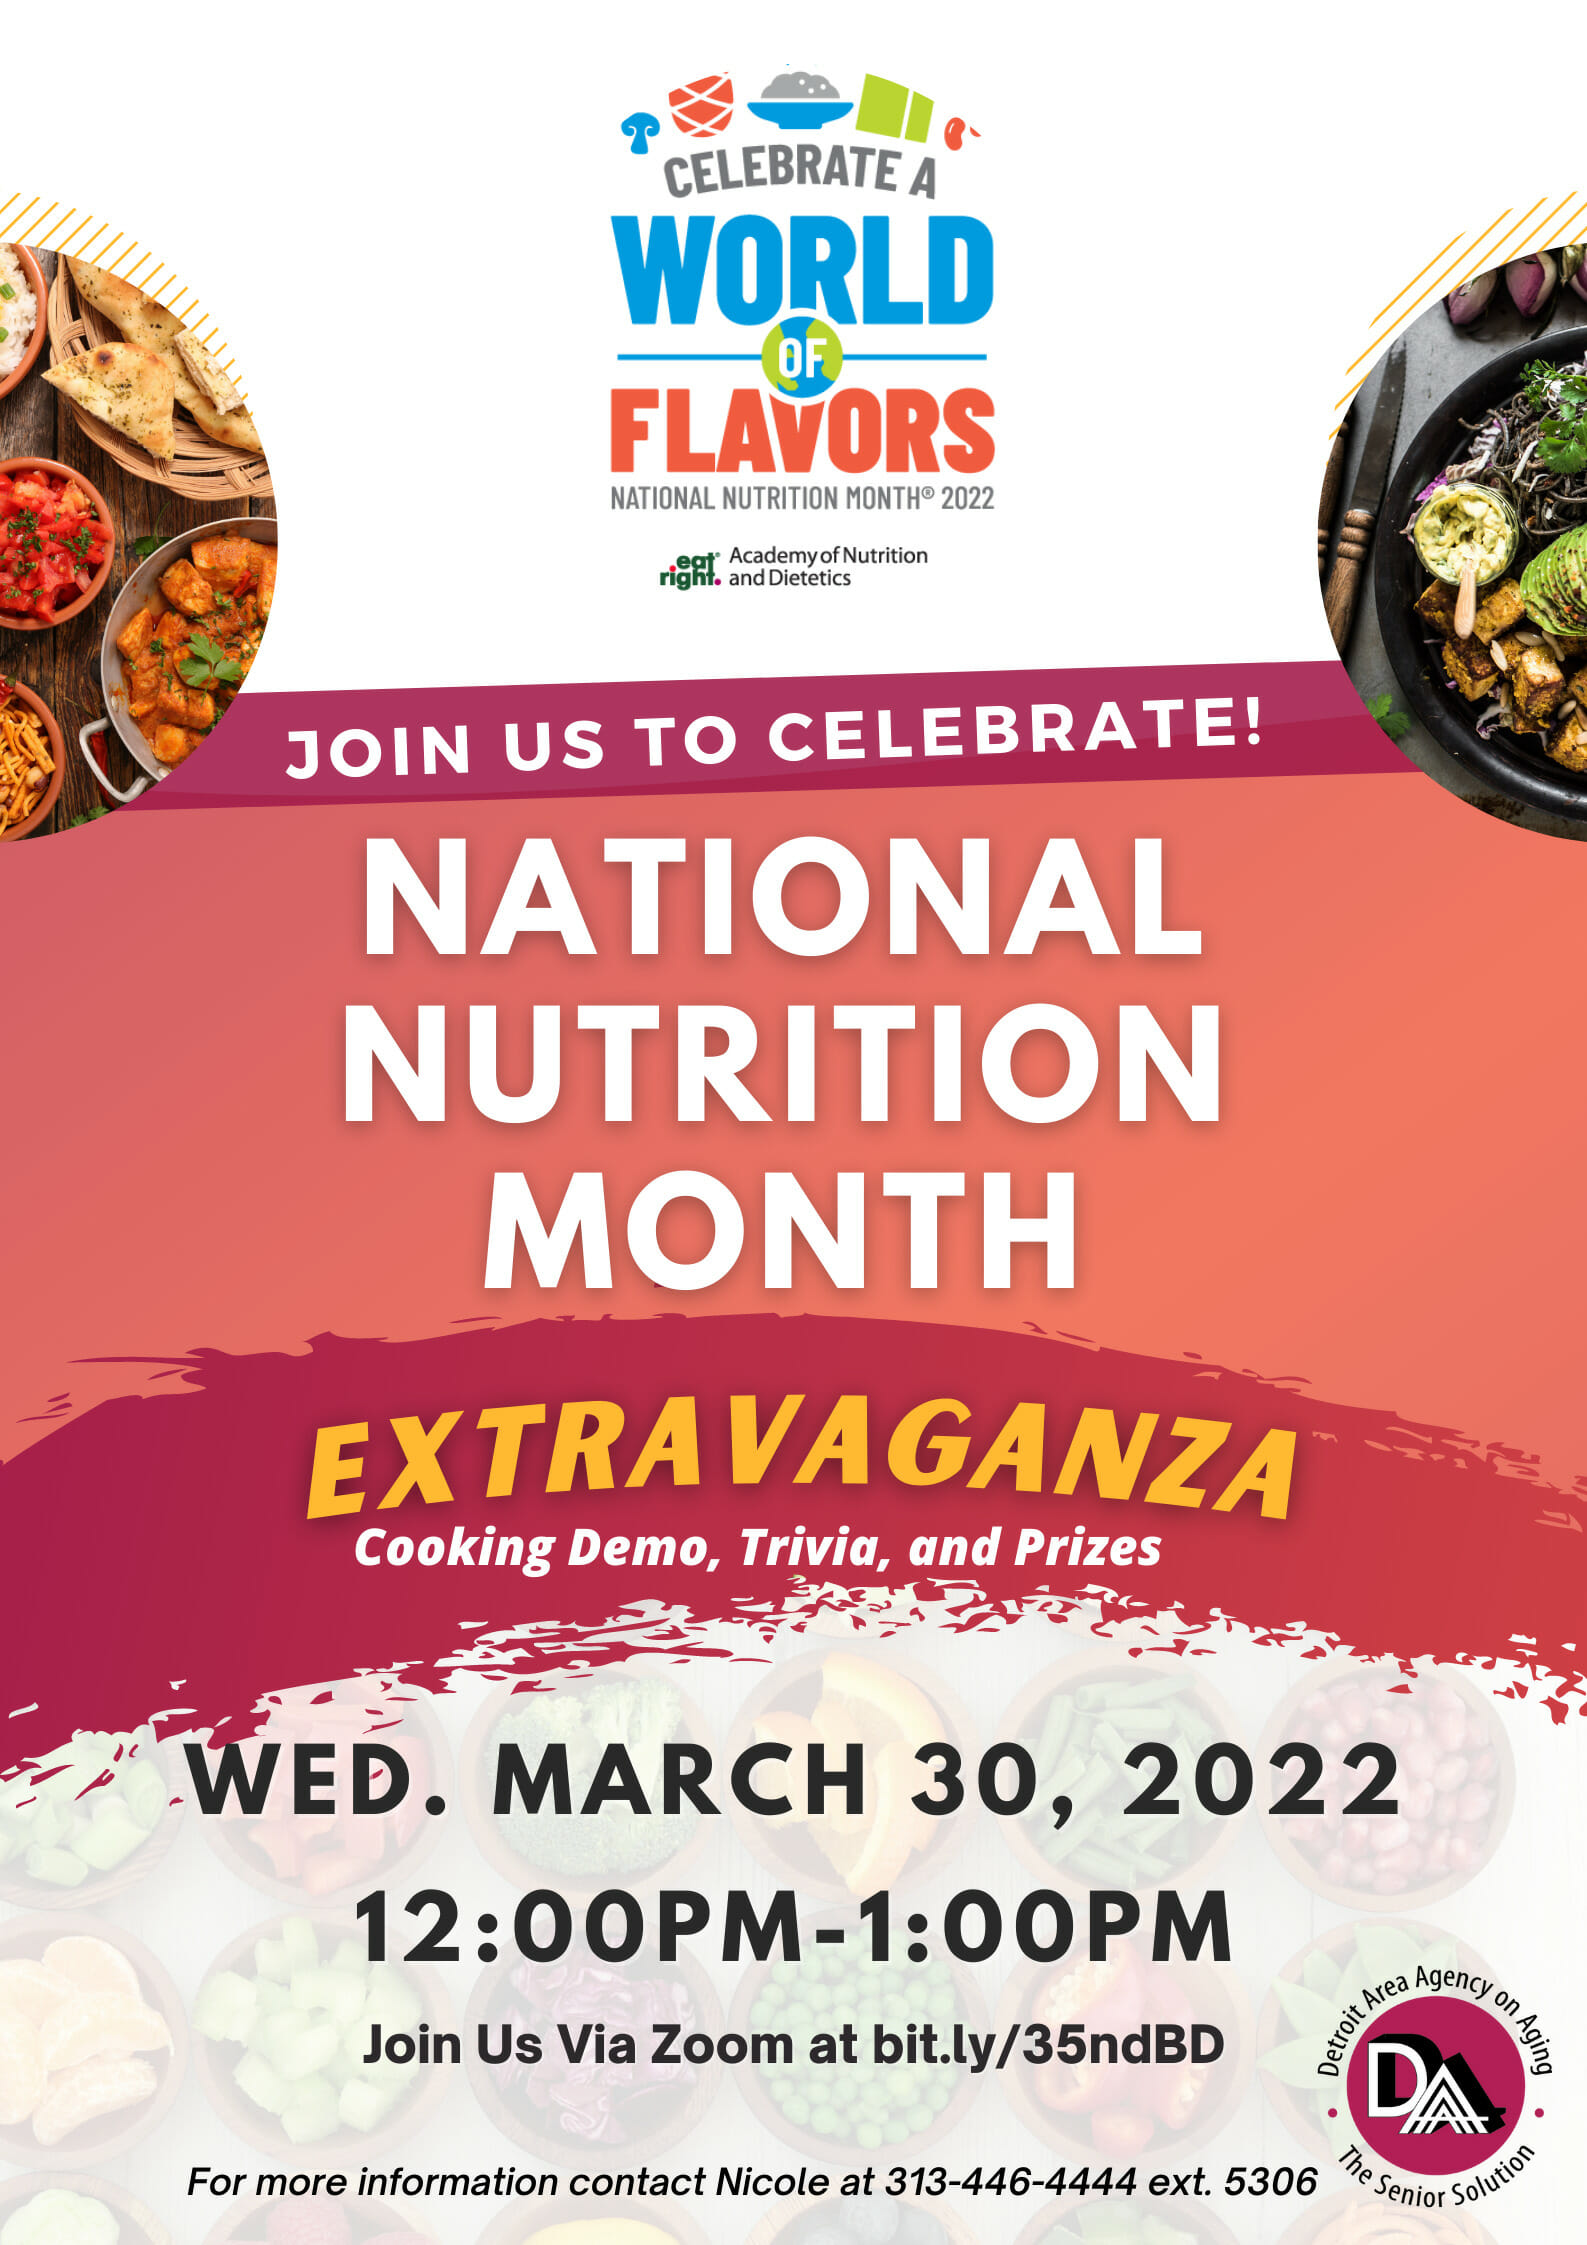 National Nutrition Month Extravaganza